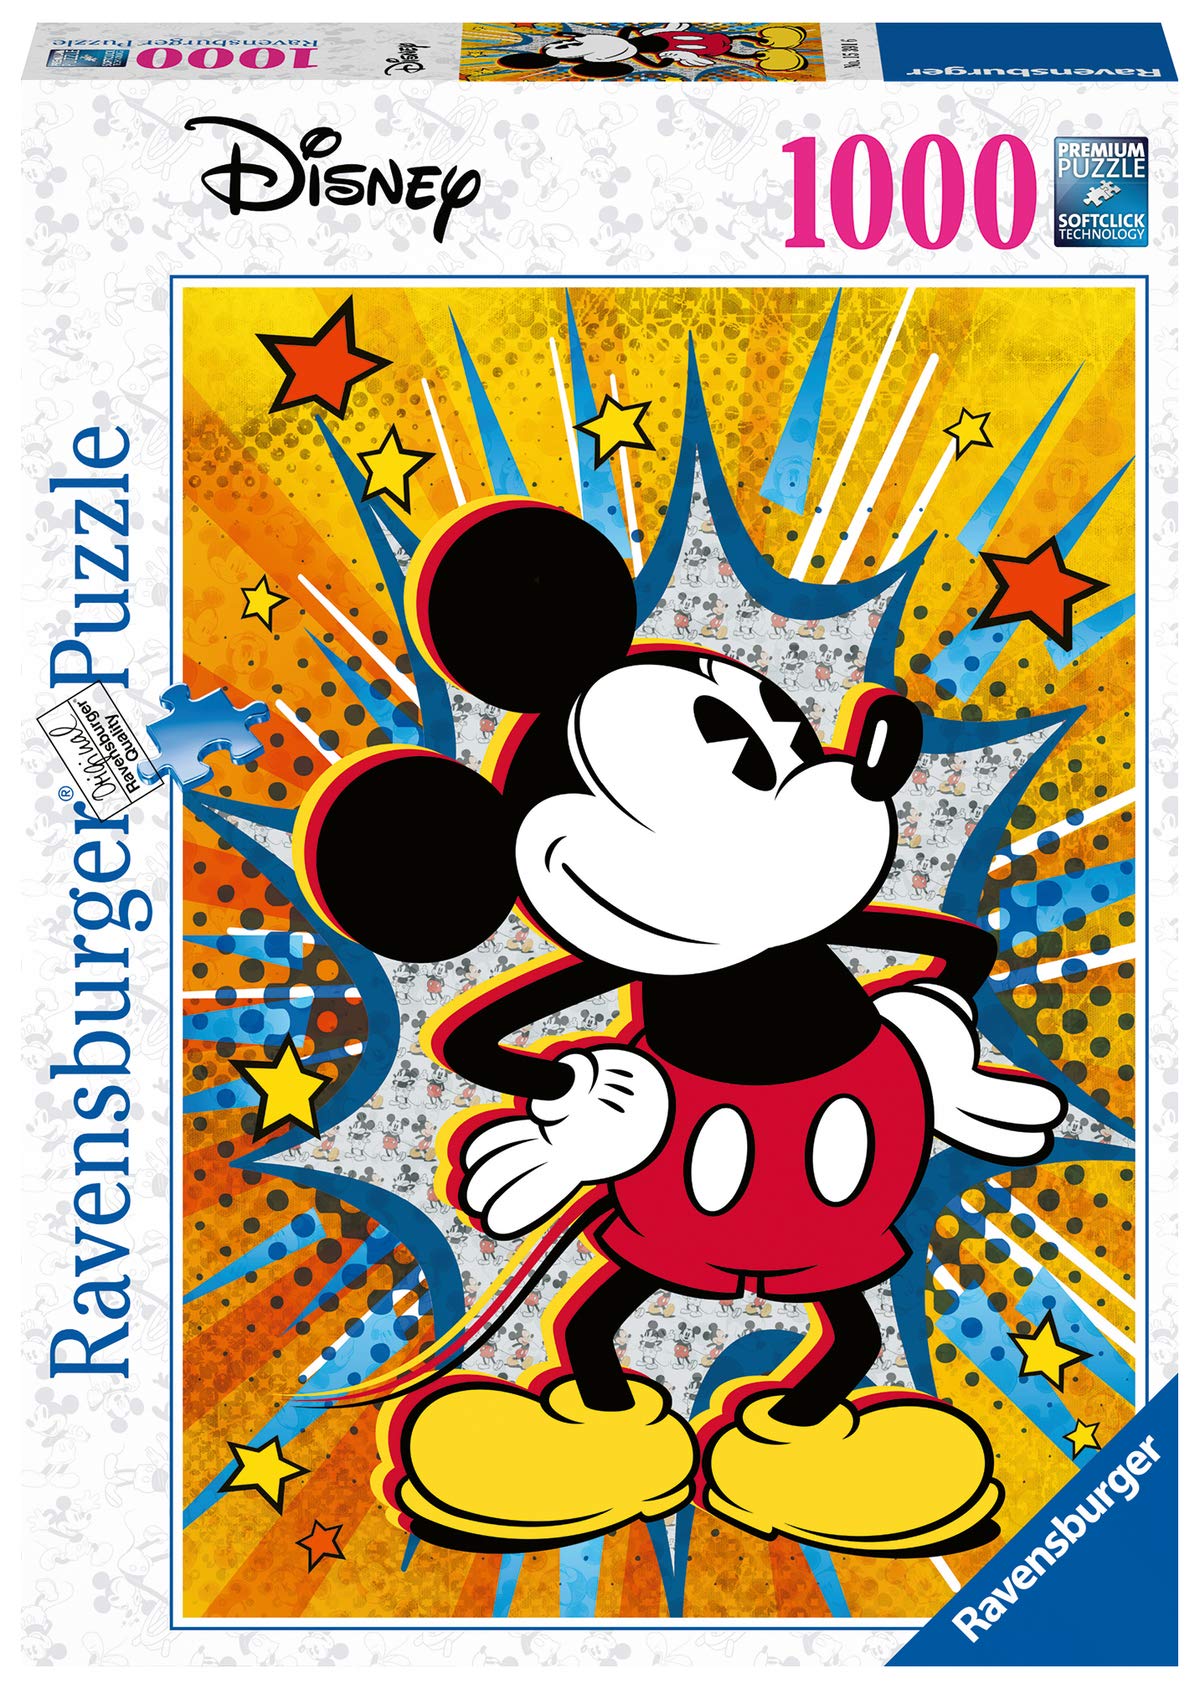 Ravensburger Retro Mickey Mouse 1000 Piece Jigsaw Puzzle for Adults - Every Piece is Unique, Softclick Technology Means Pieces Fit Together Perfectly